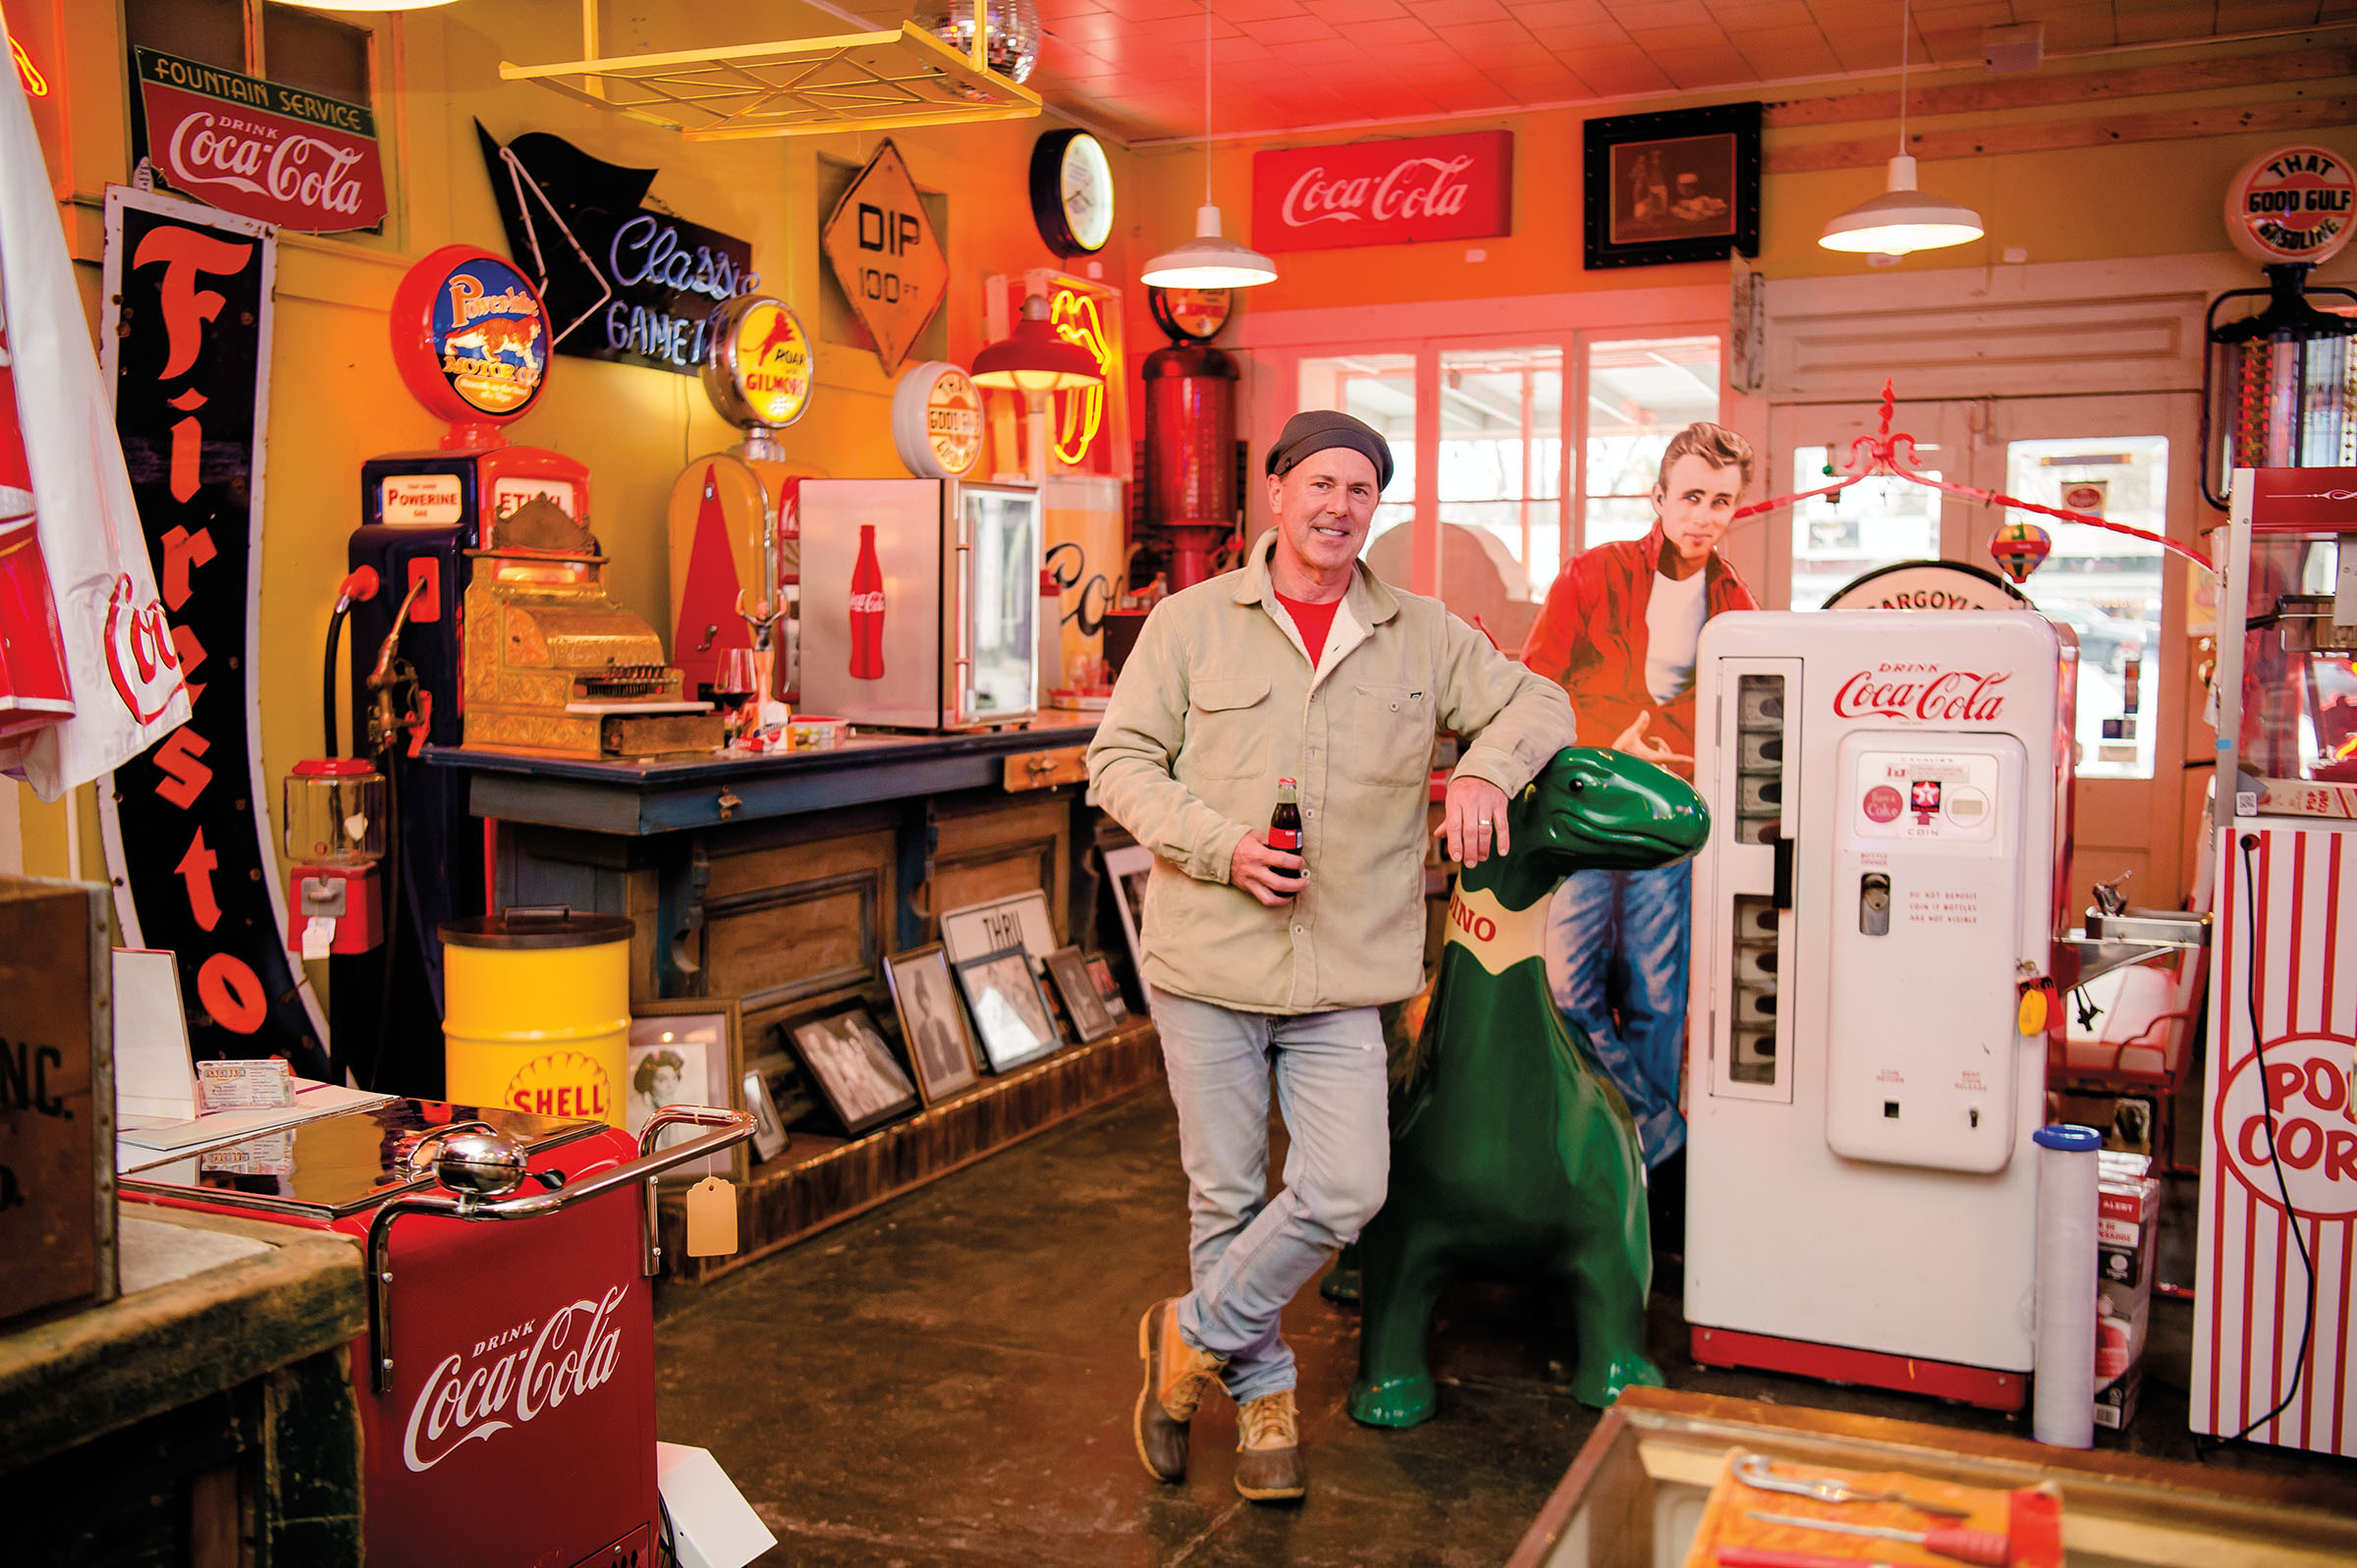 A man holds a glass-bottled Coca Cola in his hand and leans against a green dinosaur, in a room filled with vintage memorabilia